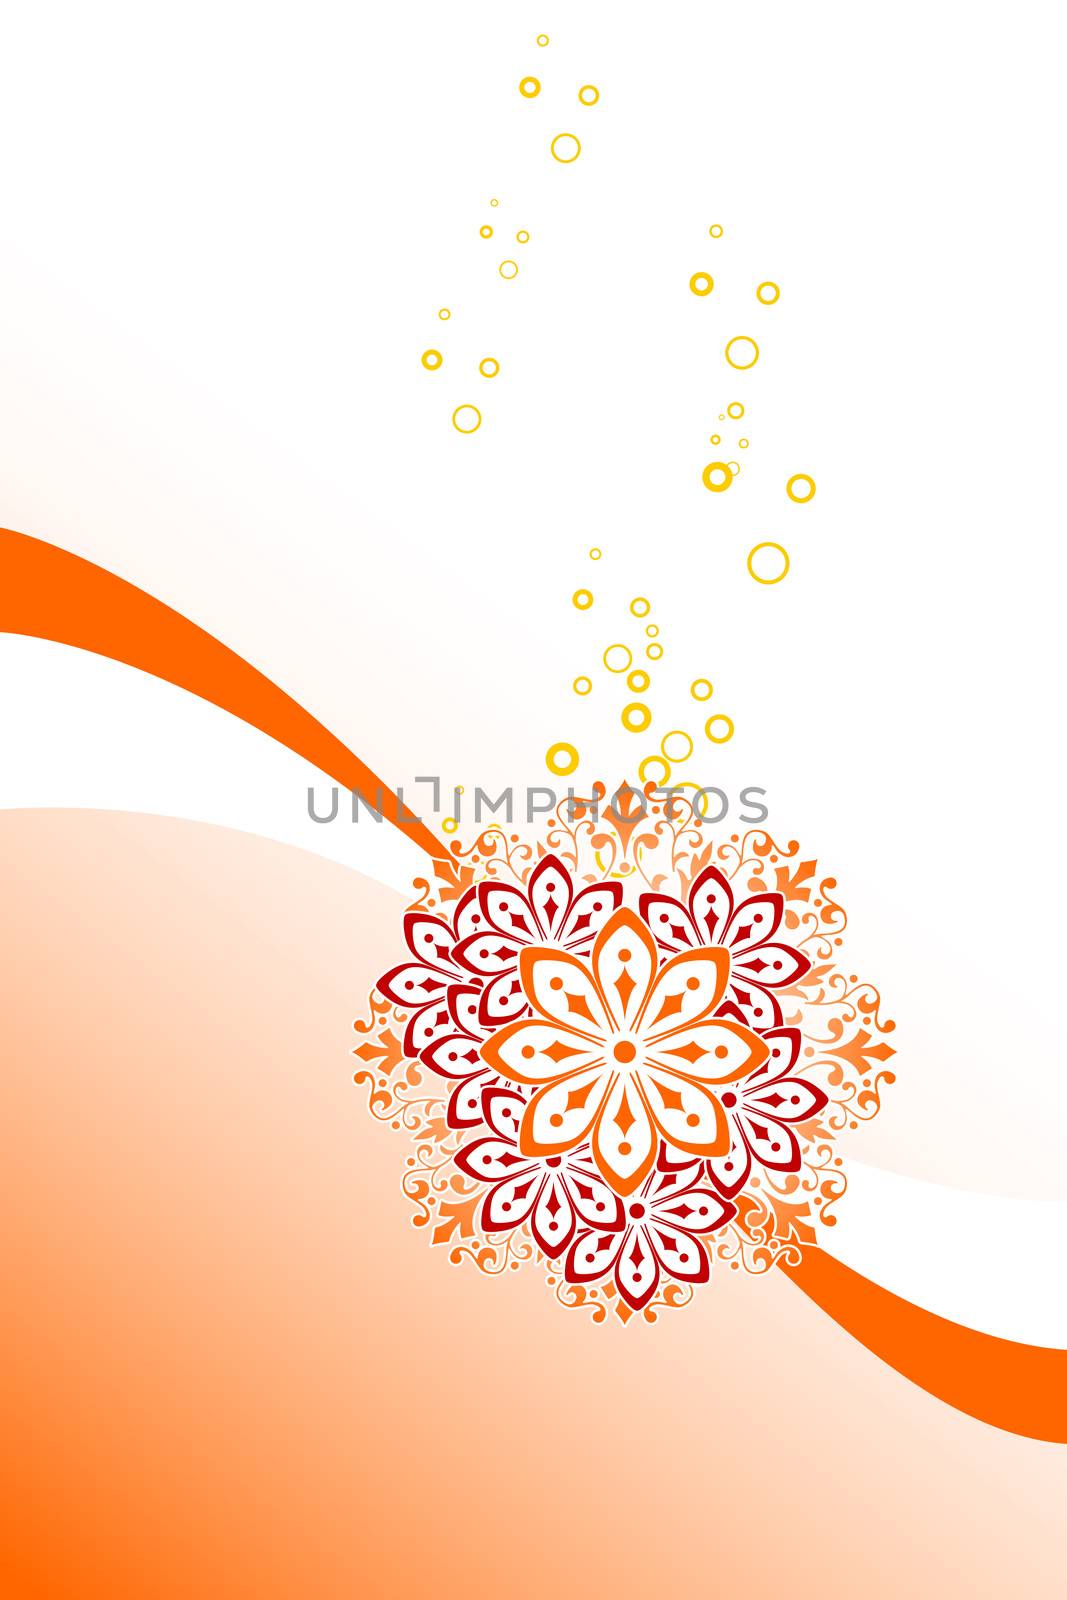 abstract background with circles and flowers, vector illustratio by WaD